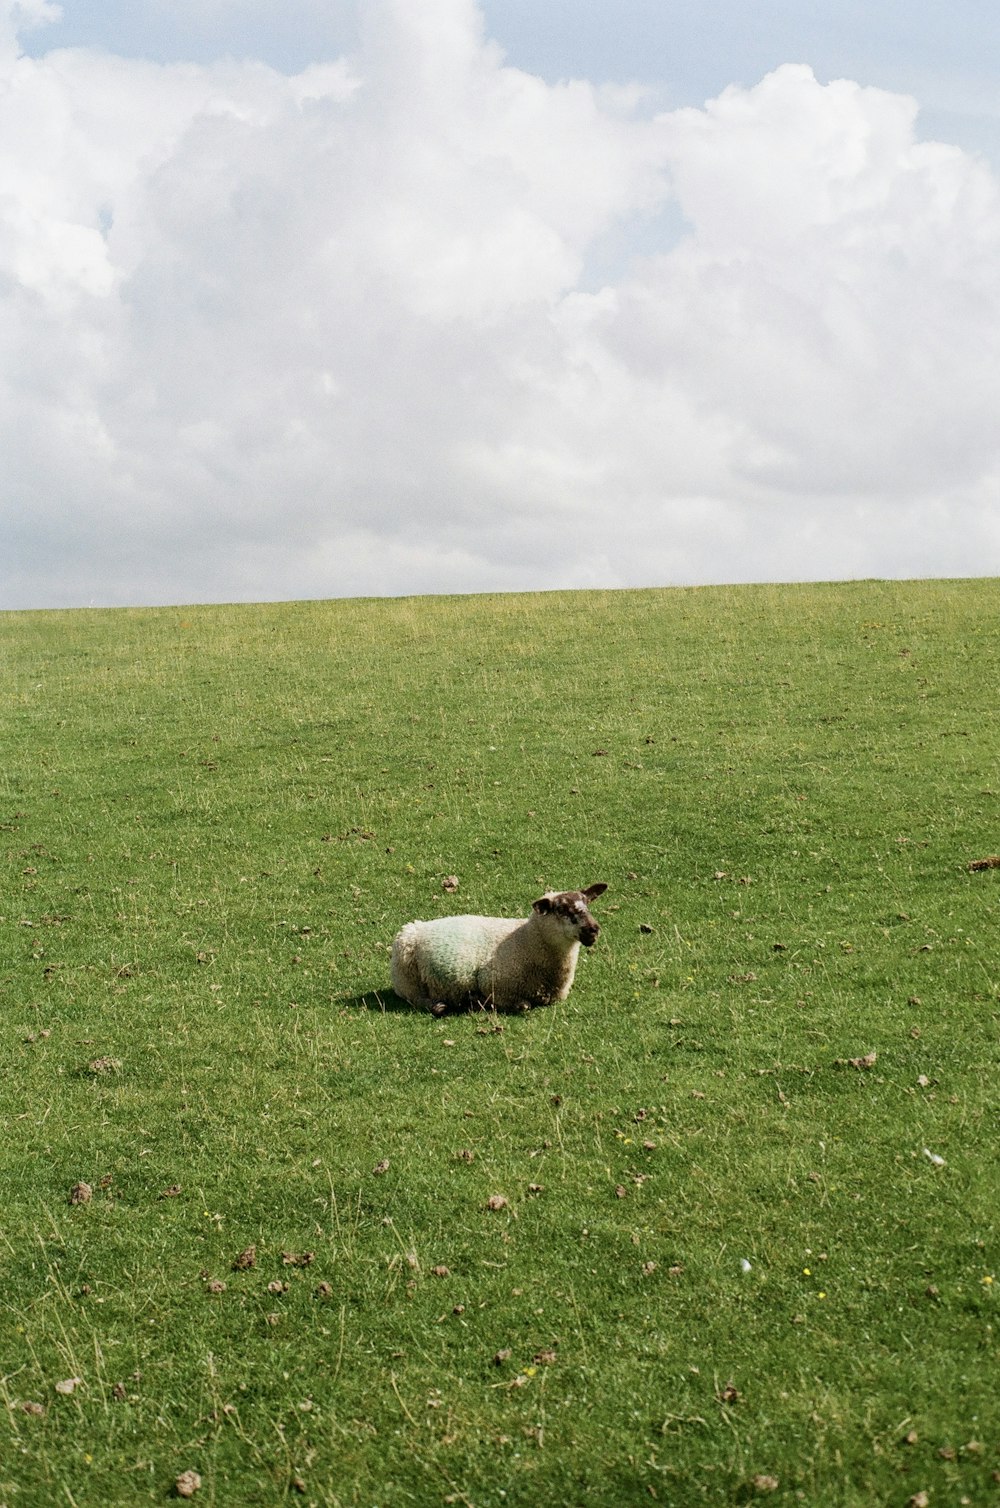 a sheep is standing in the middle of a grassy field